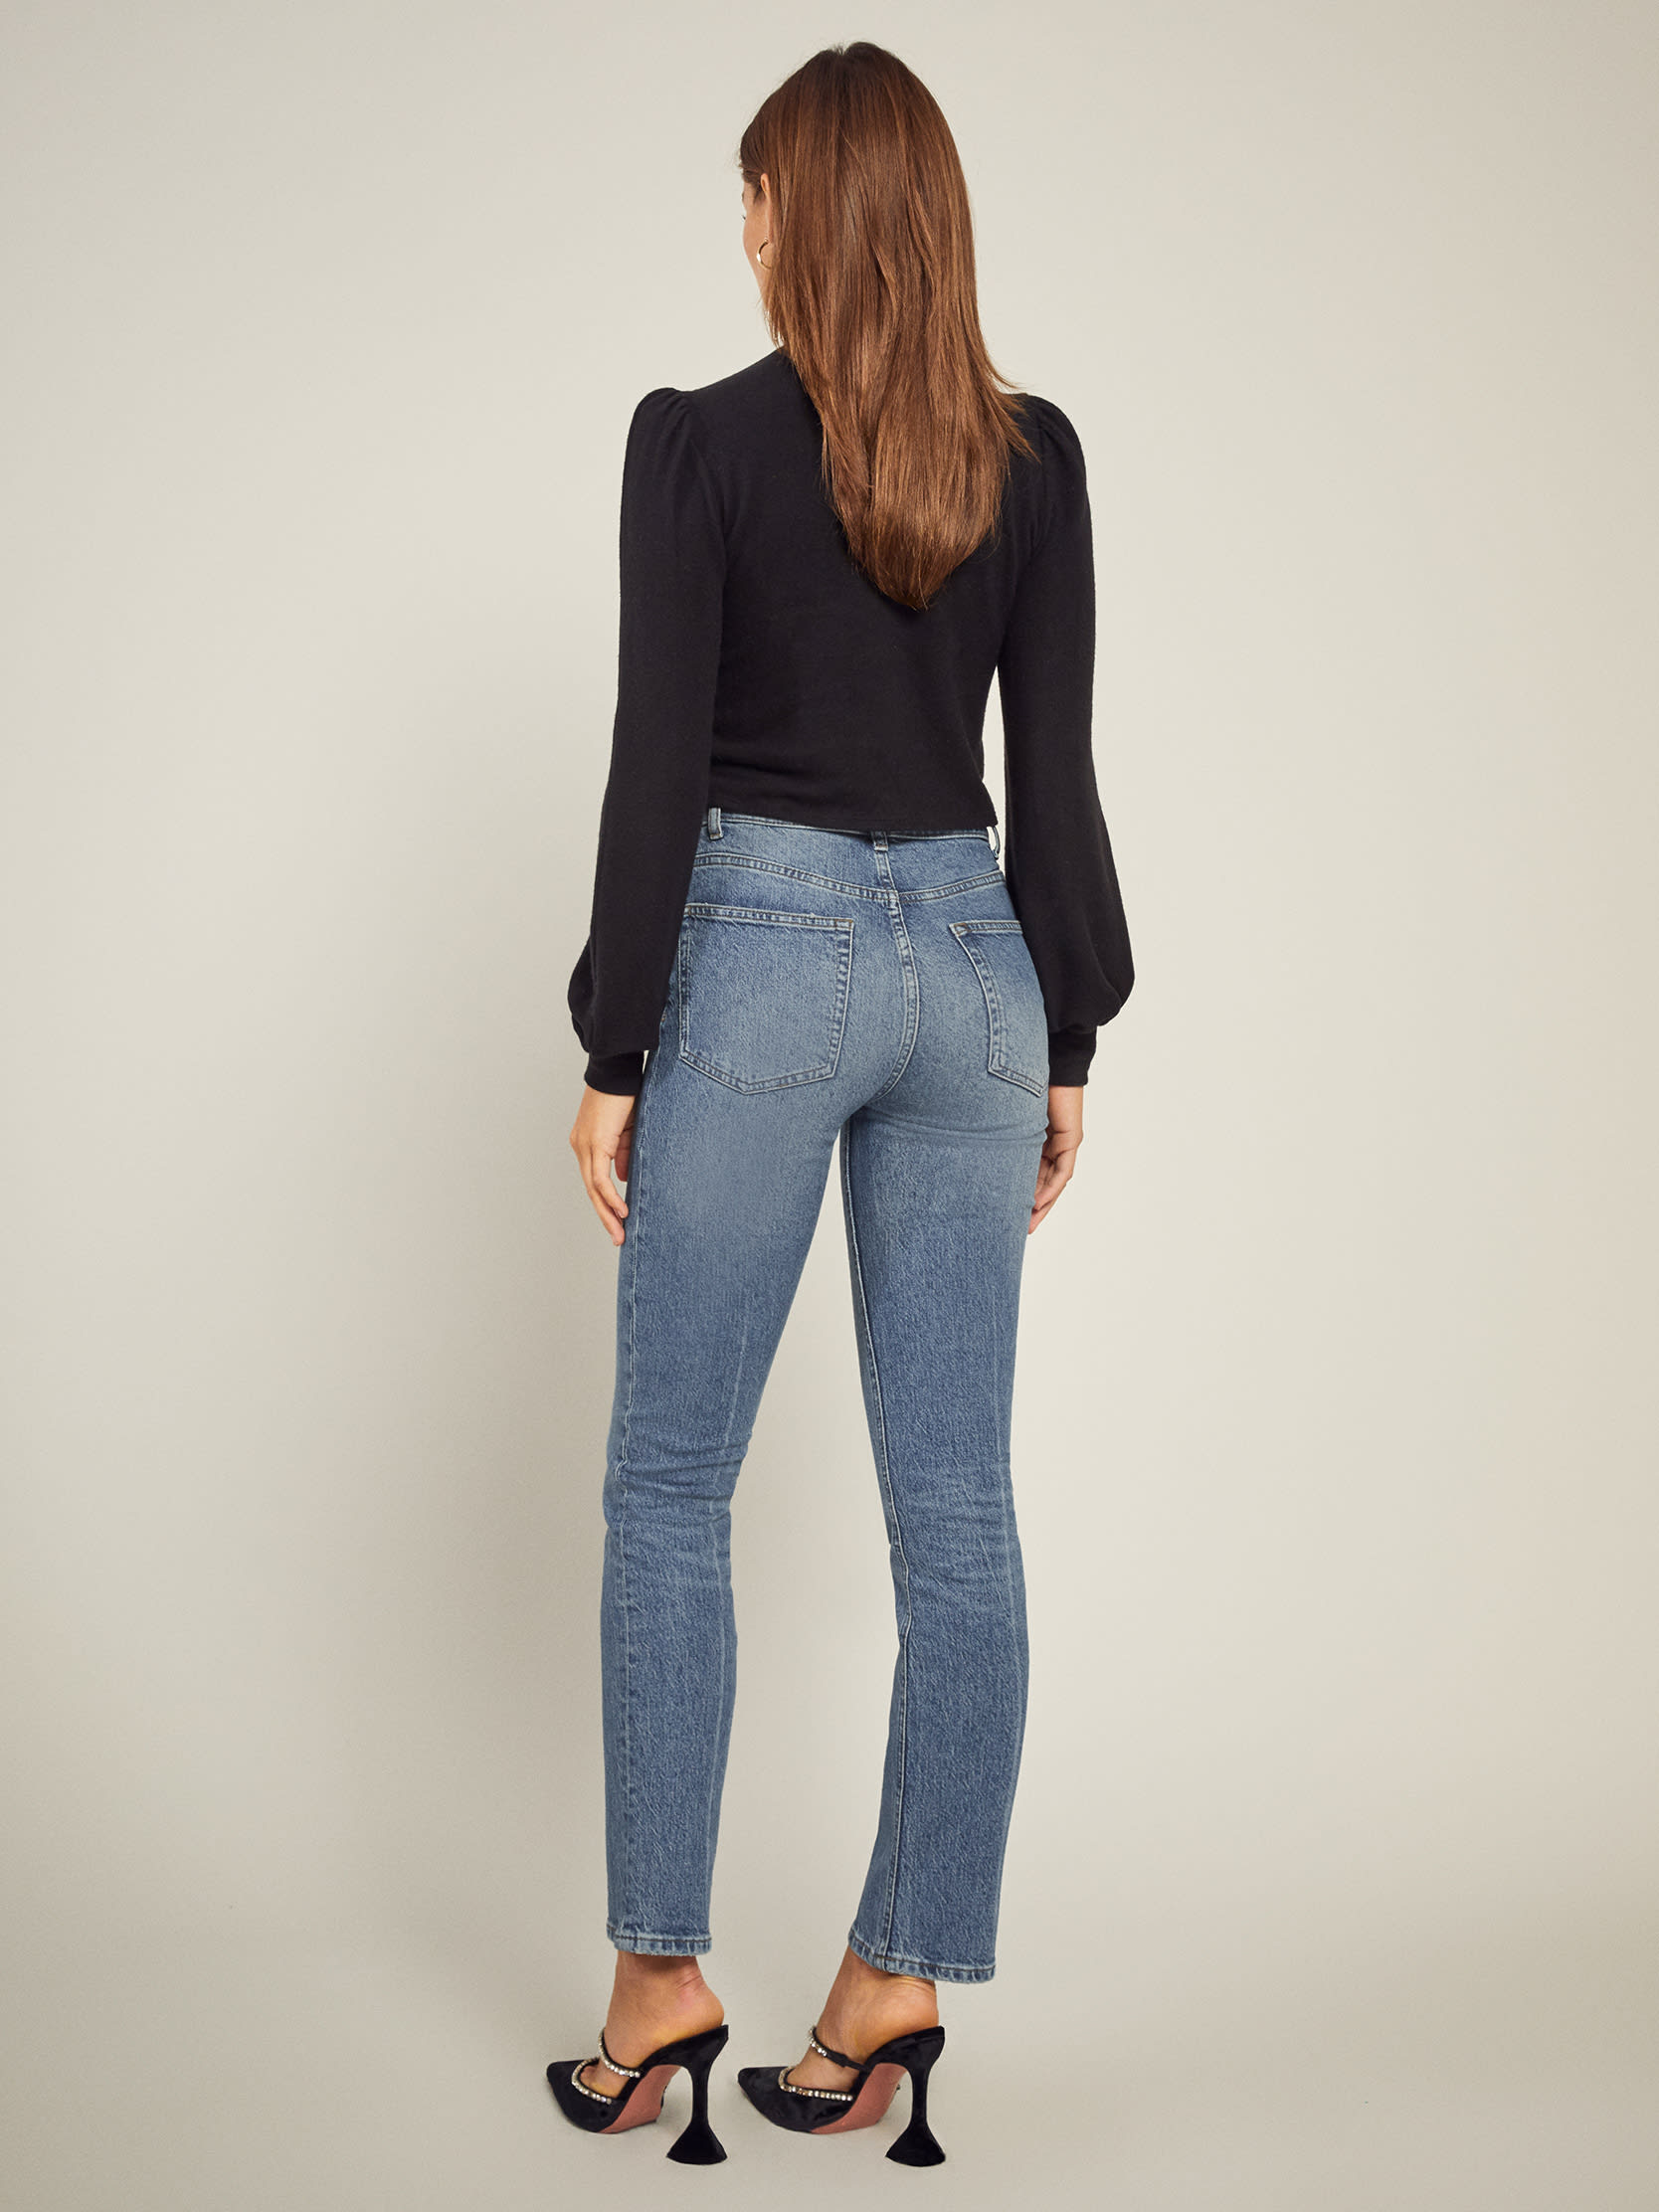 Liza Button Fly High Rise Straight Jeans, thumbnail image 3